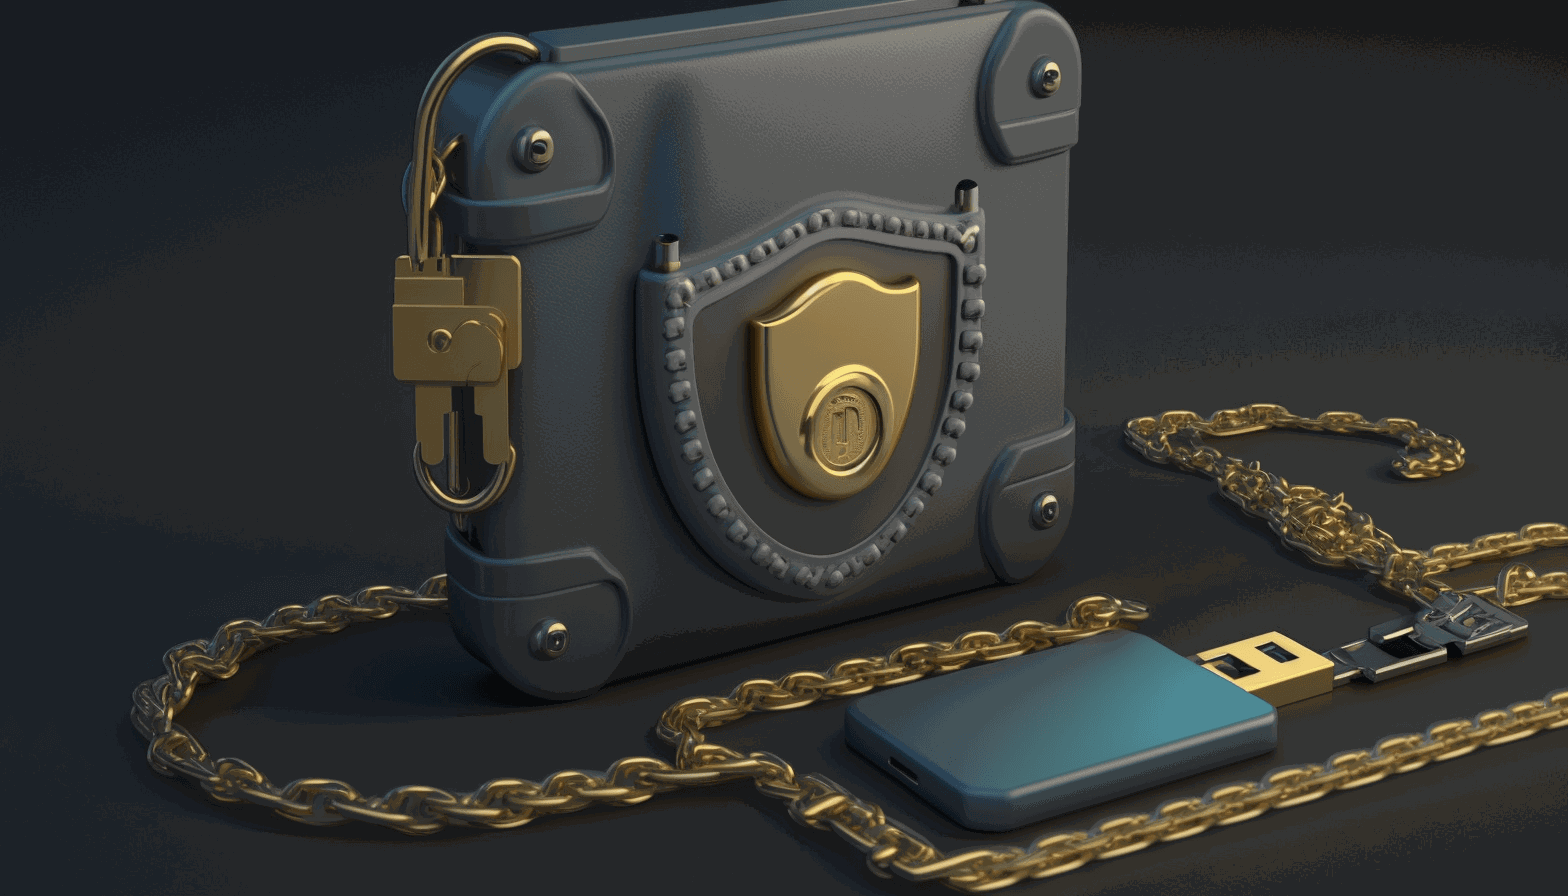 A hardware wallet with a padlock and chain around it, symbolizing the security of storing cryptocurrency in a hardware wallet.